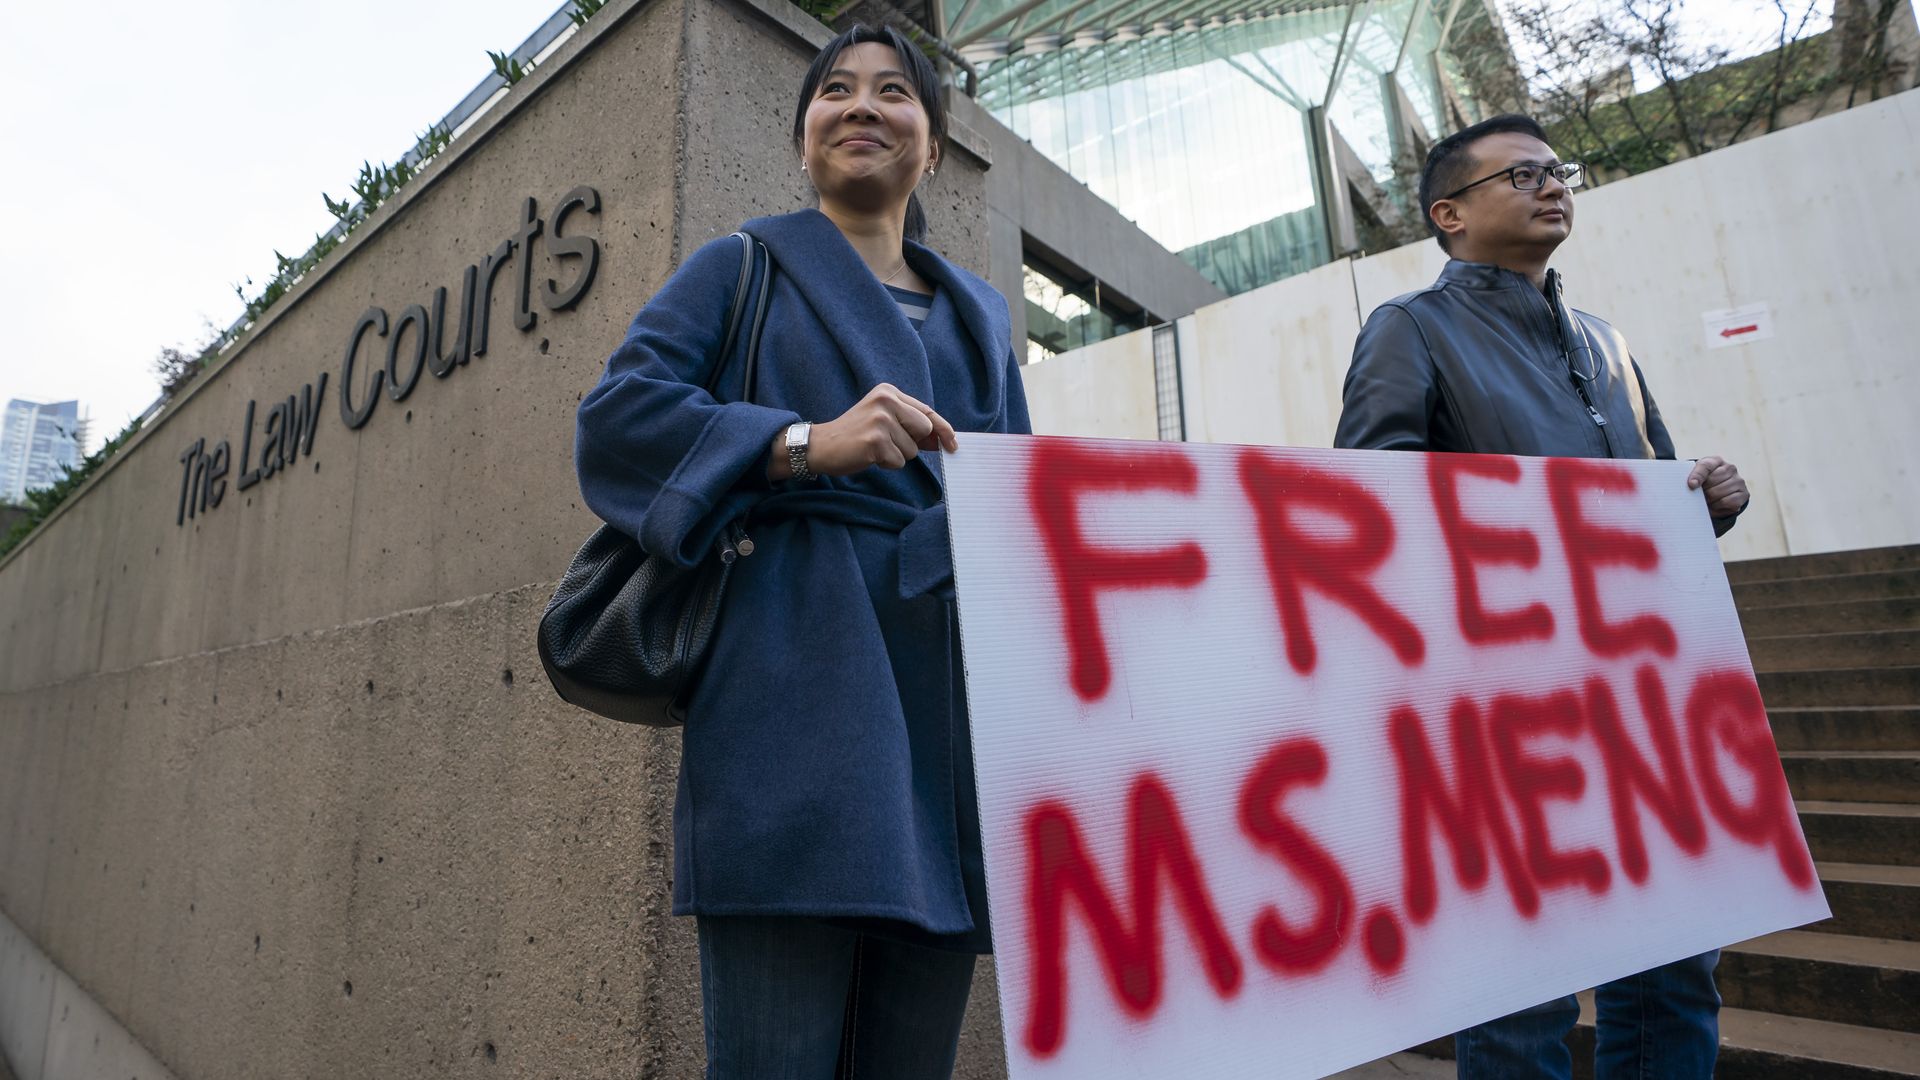 Protesters carrying sign reading "Free Ms. Meng" outside courthouse